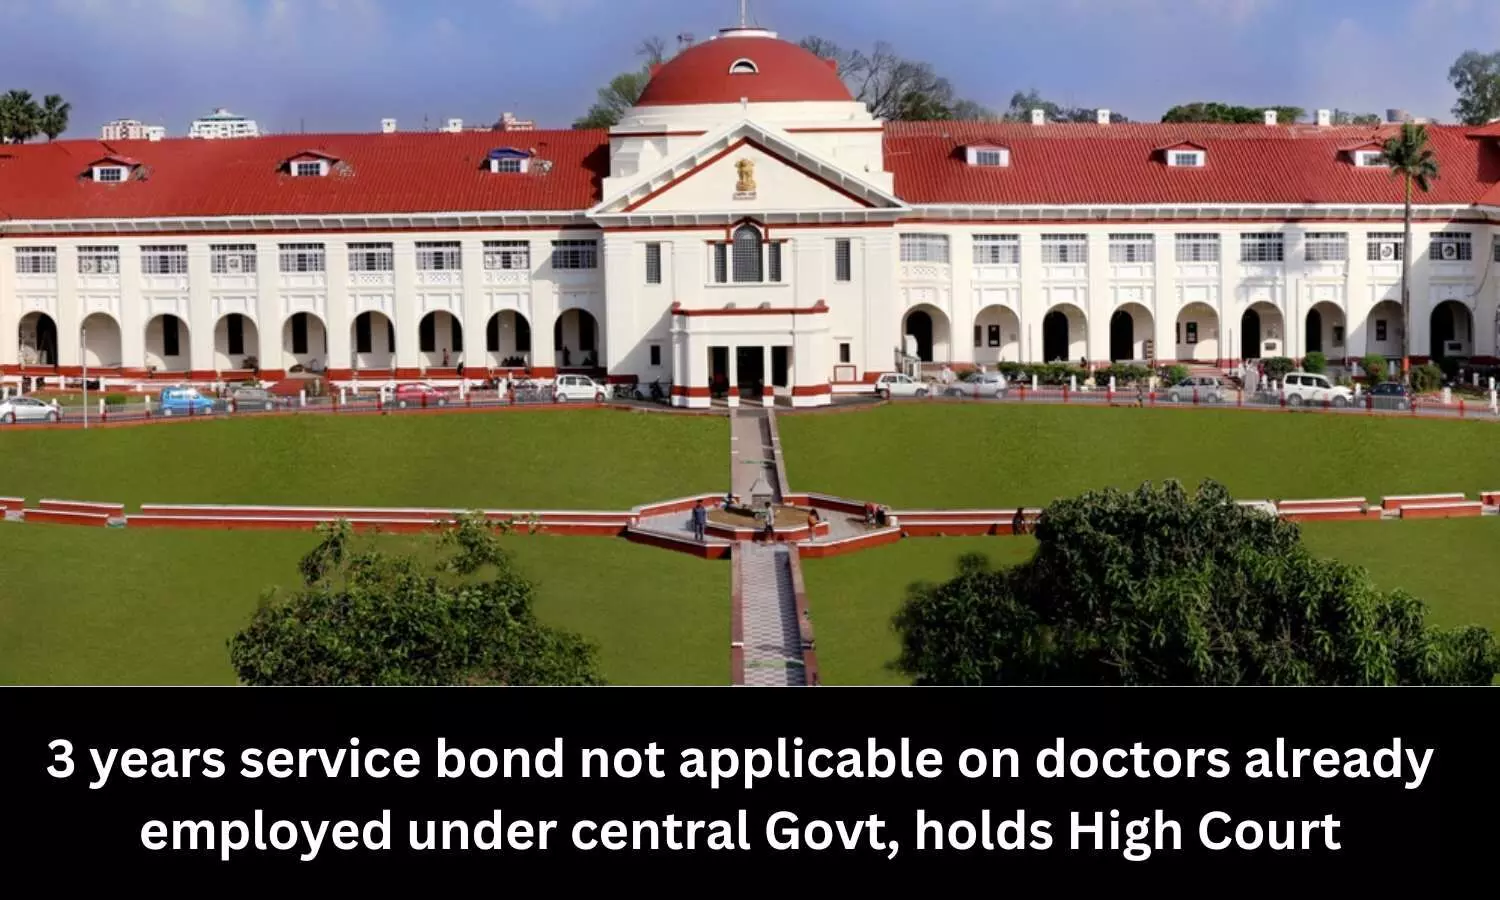 3 years service bond not applicable on doctors already employed under central Govt, holds High Court